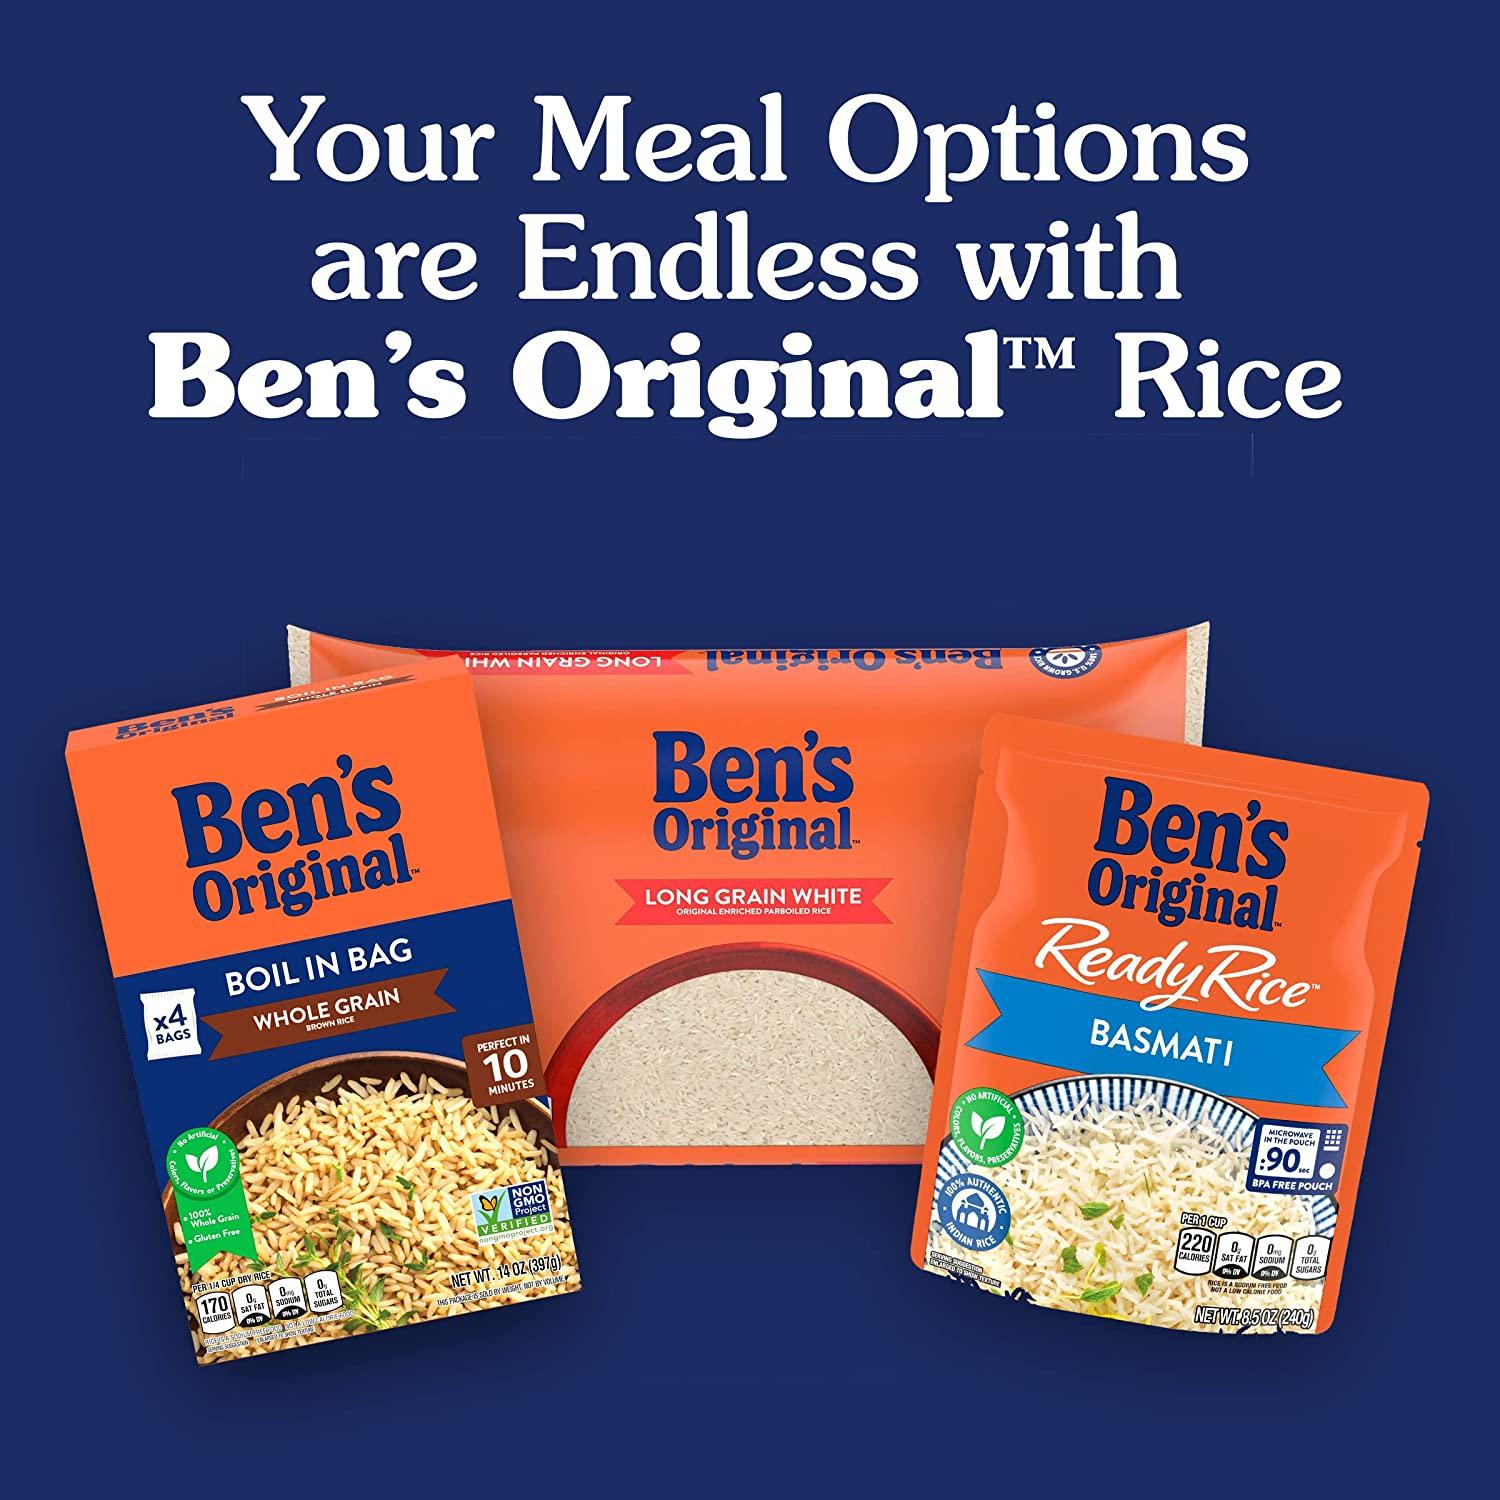 Ben's Original Ready Rice Roasted Chicken Flavored Rice